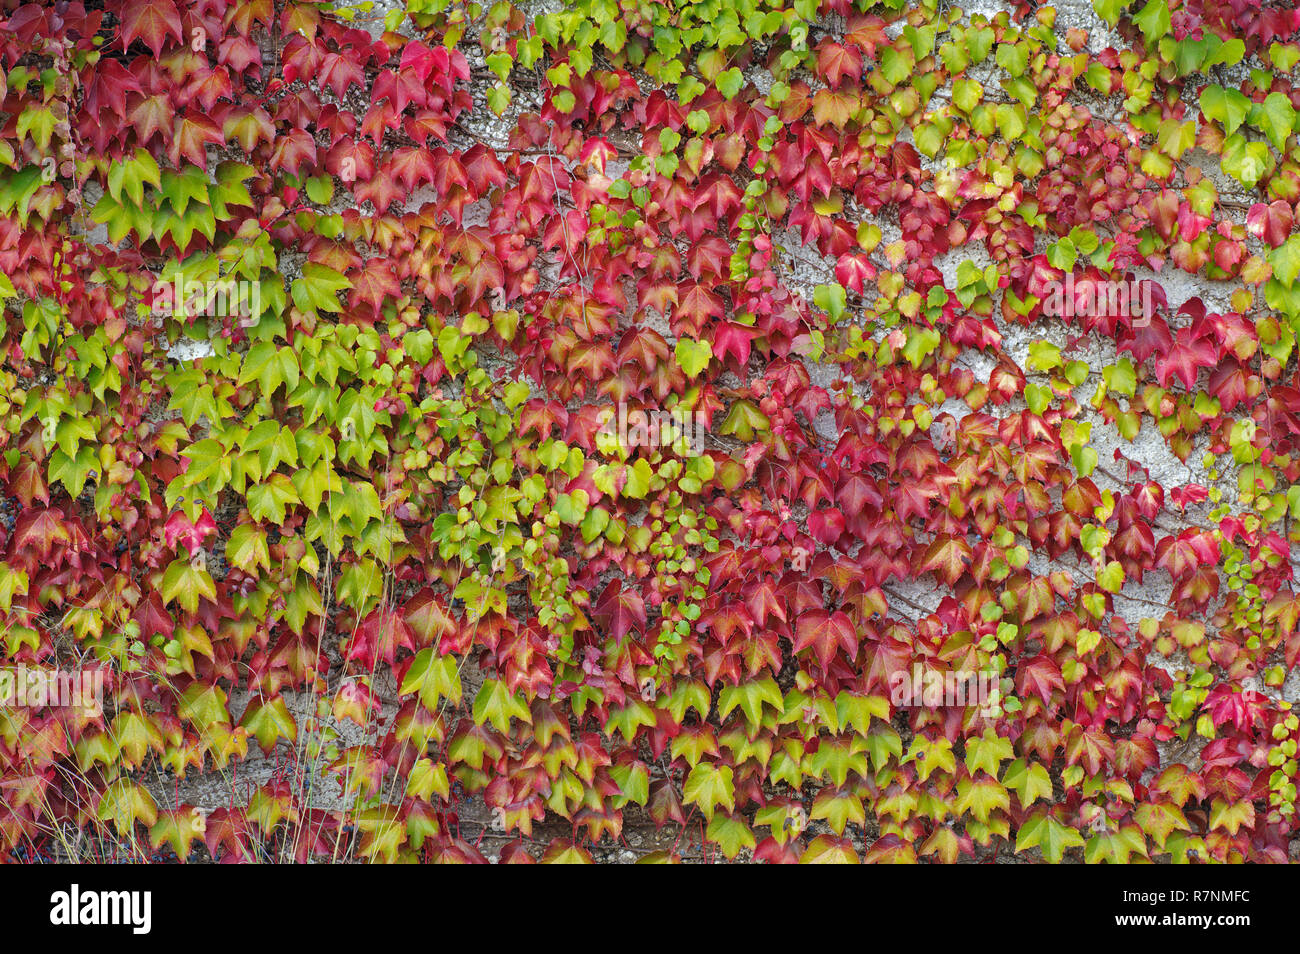 colors of the autumn: leaves of Parthenocissusn tricuspidata, the Boston ivy or Grape ivy, family Vitaceae Stock Photo